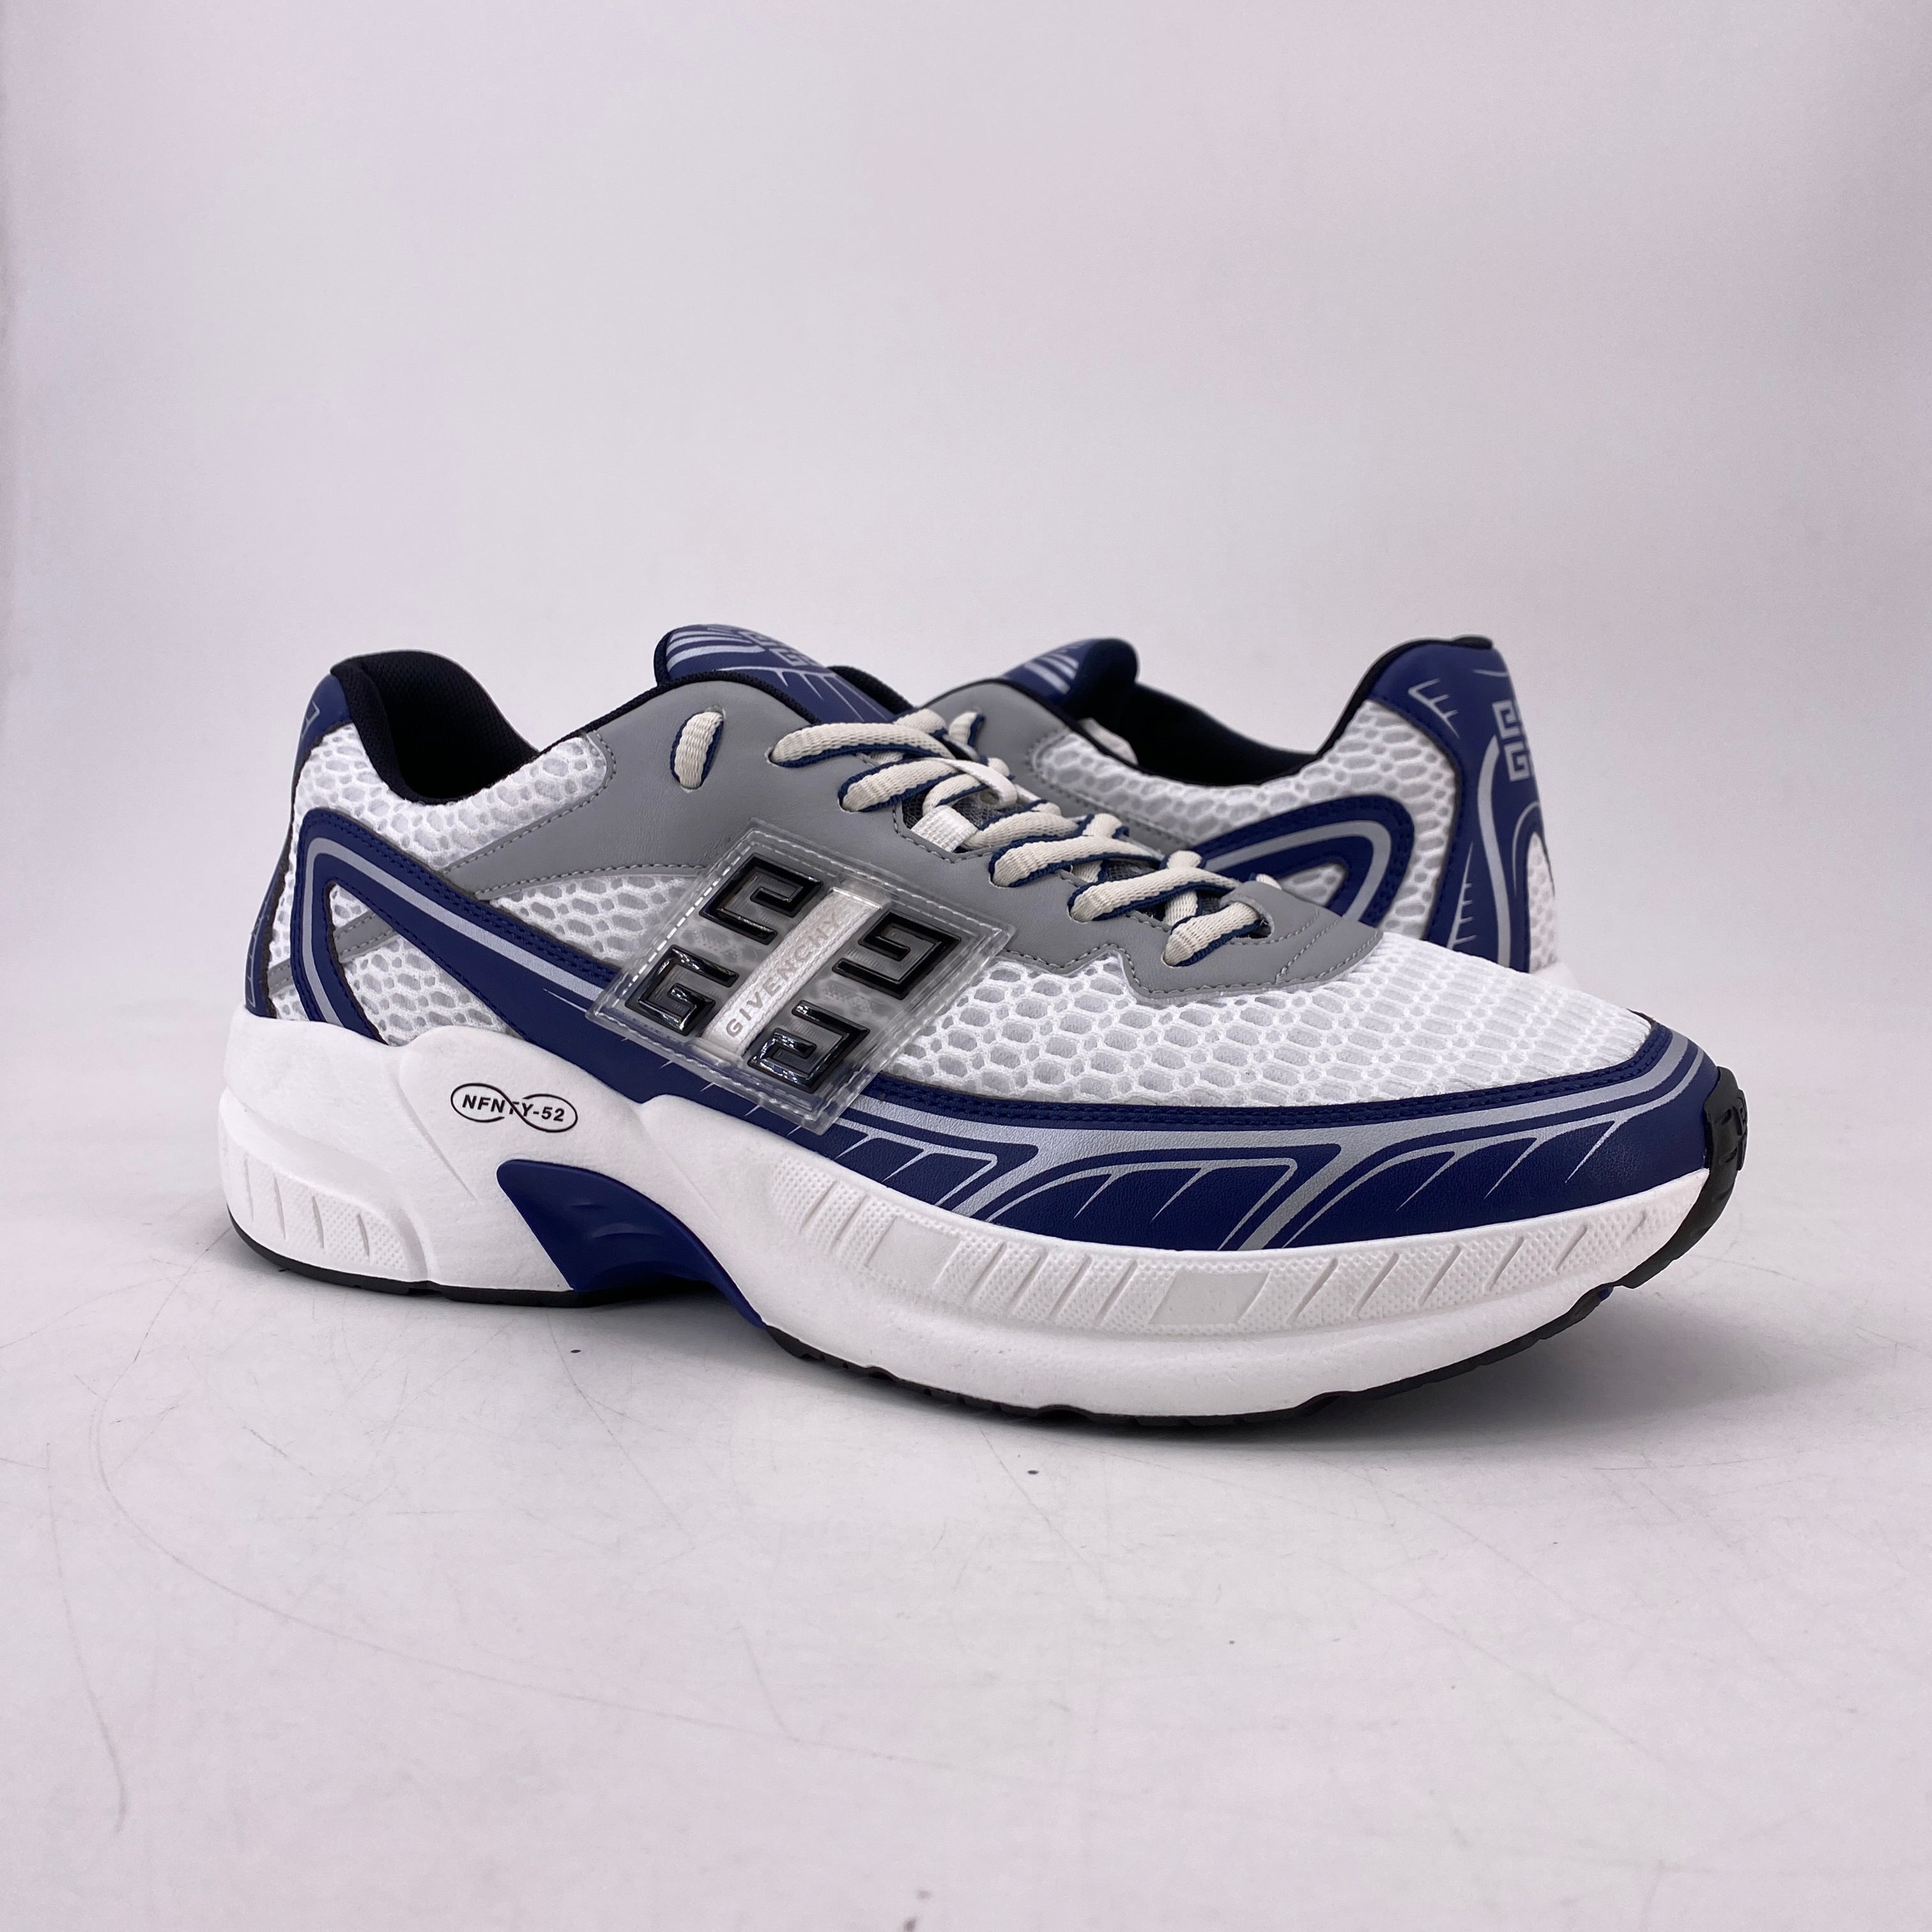 Givenchy Runner &quot;Nfnty-52 Blue&quot;  New Size 41